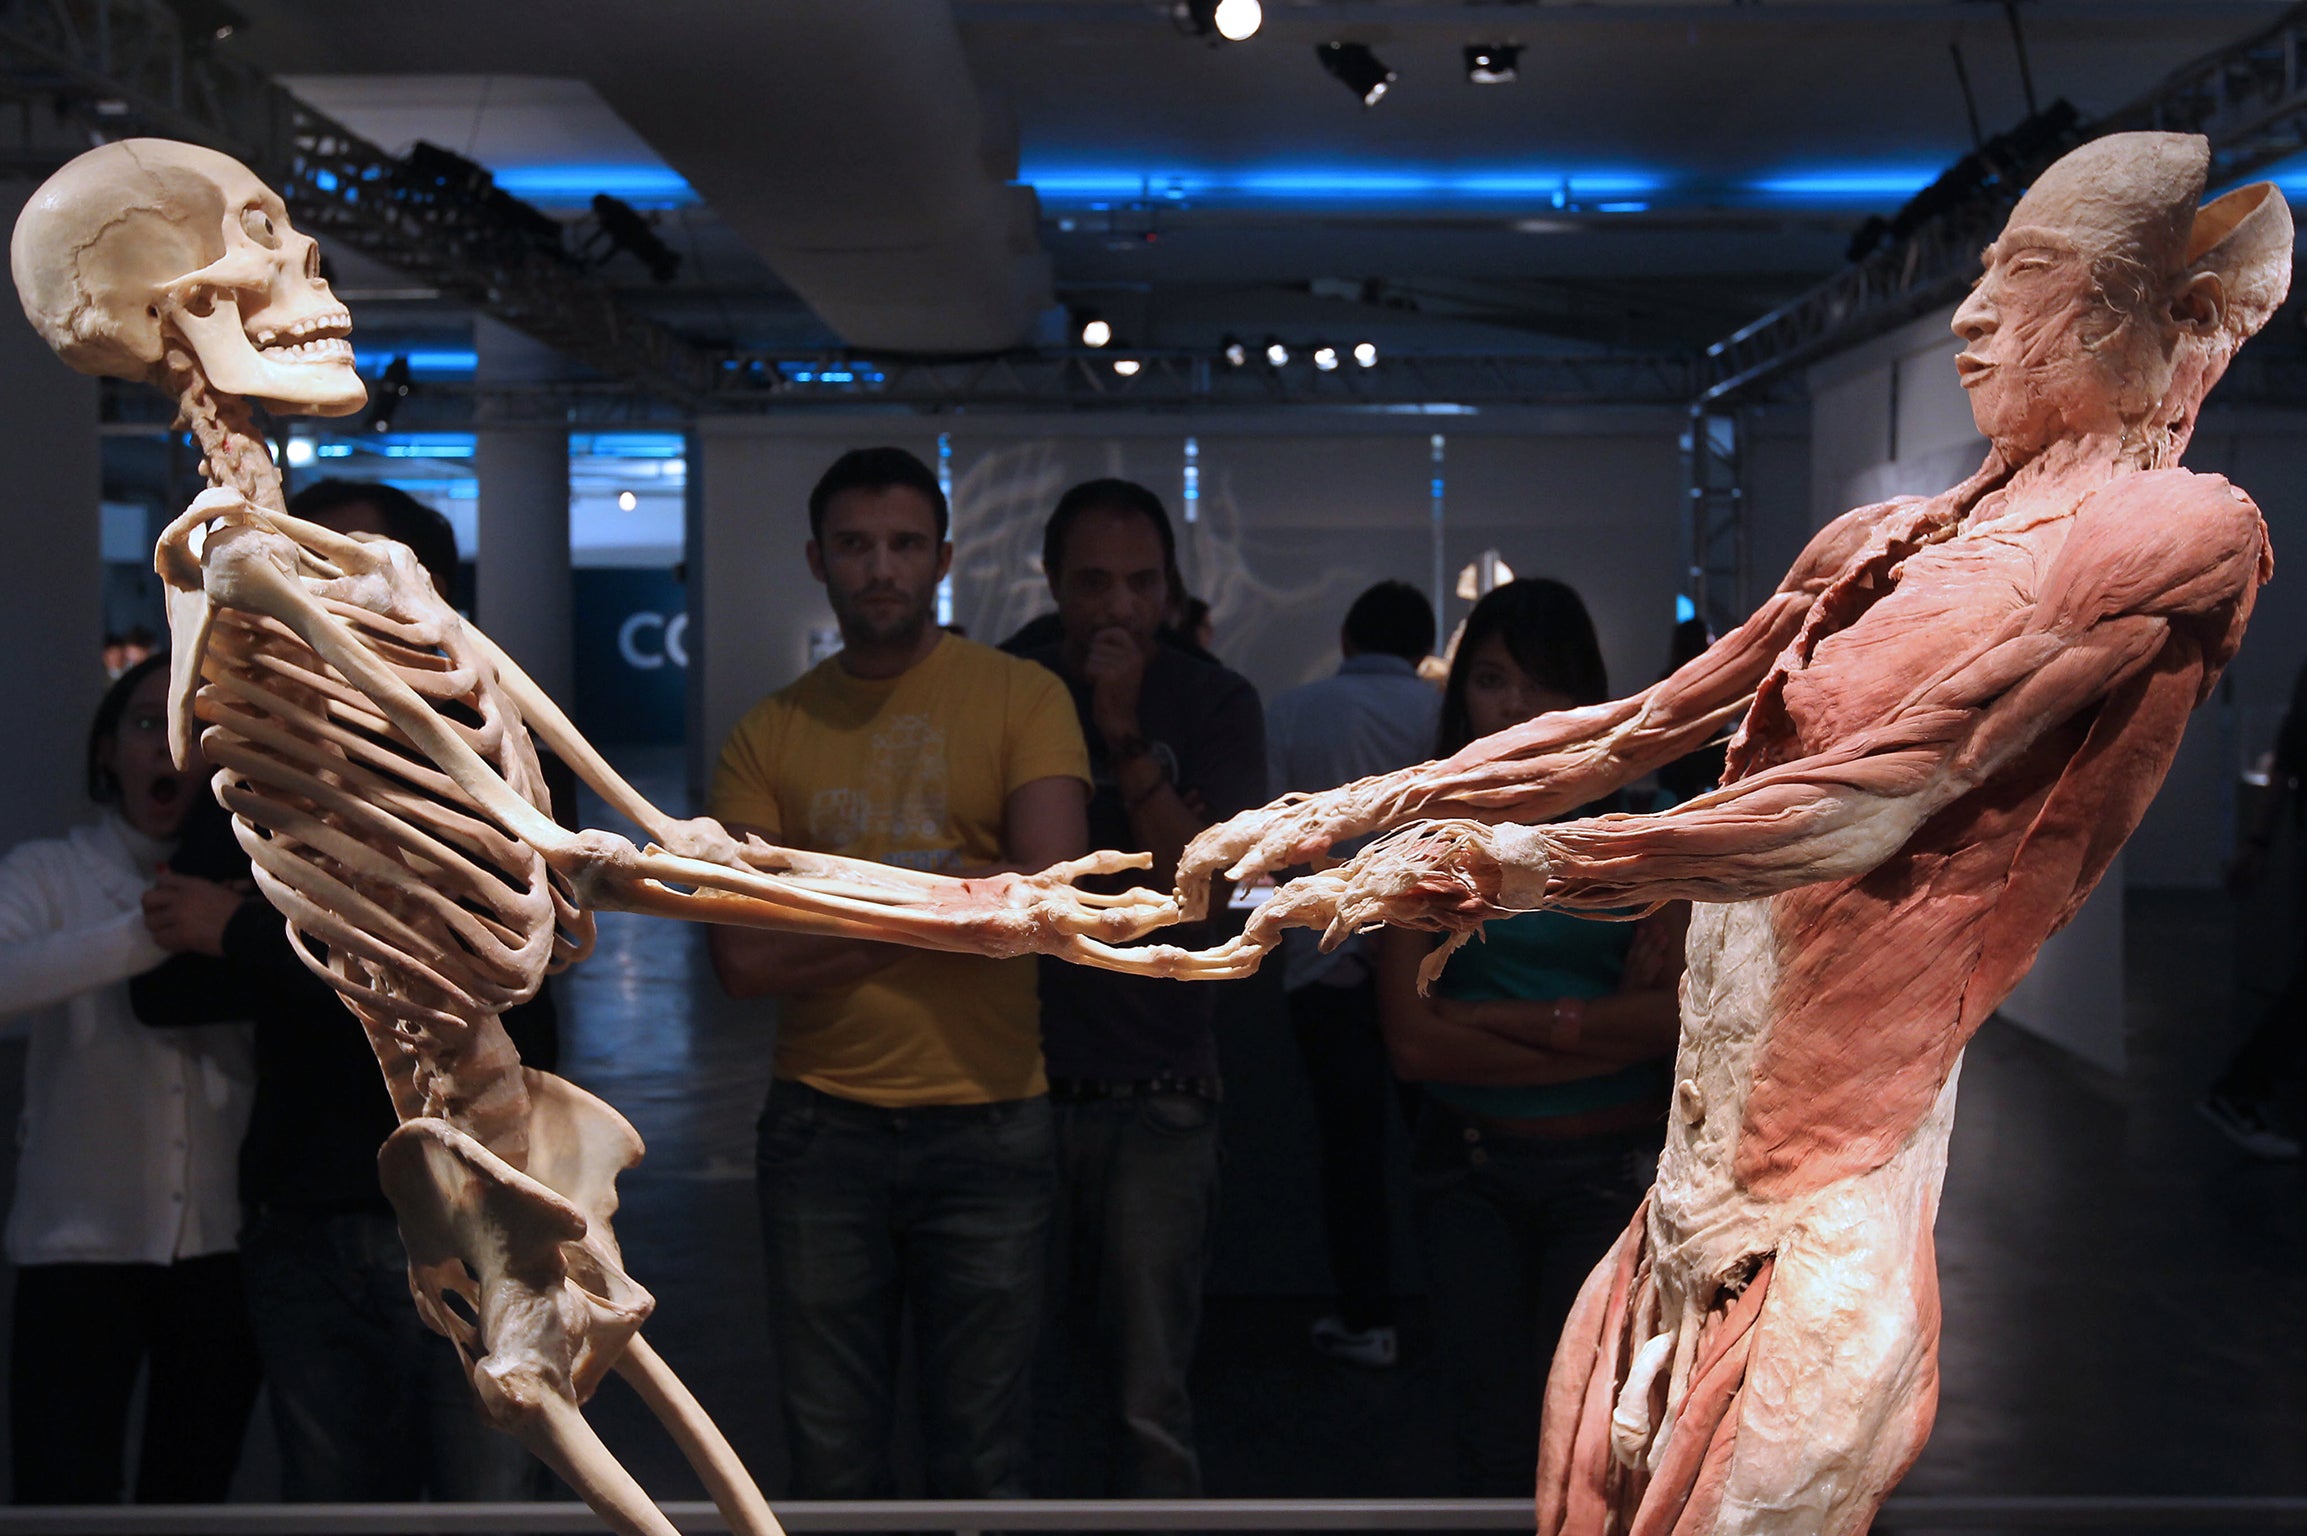 Visitors look at plastinated human bodies at 'Body - The Exhibition', in Sao Paulo, Brazil; the technology to store a high-resolution, three-dimensional copy of body organs and tissues already exists